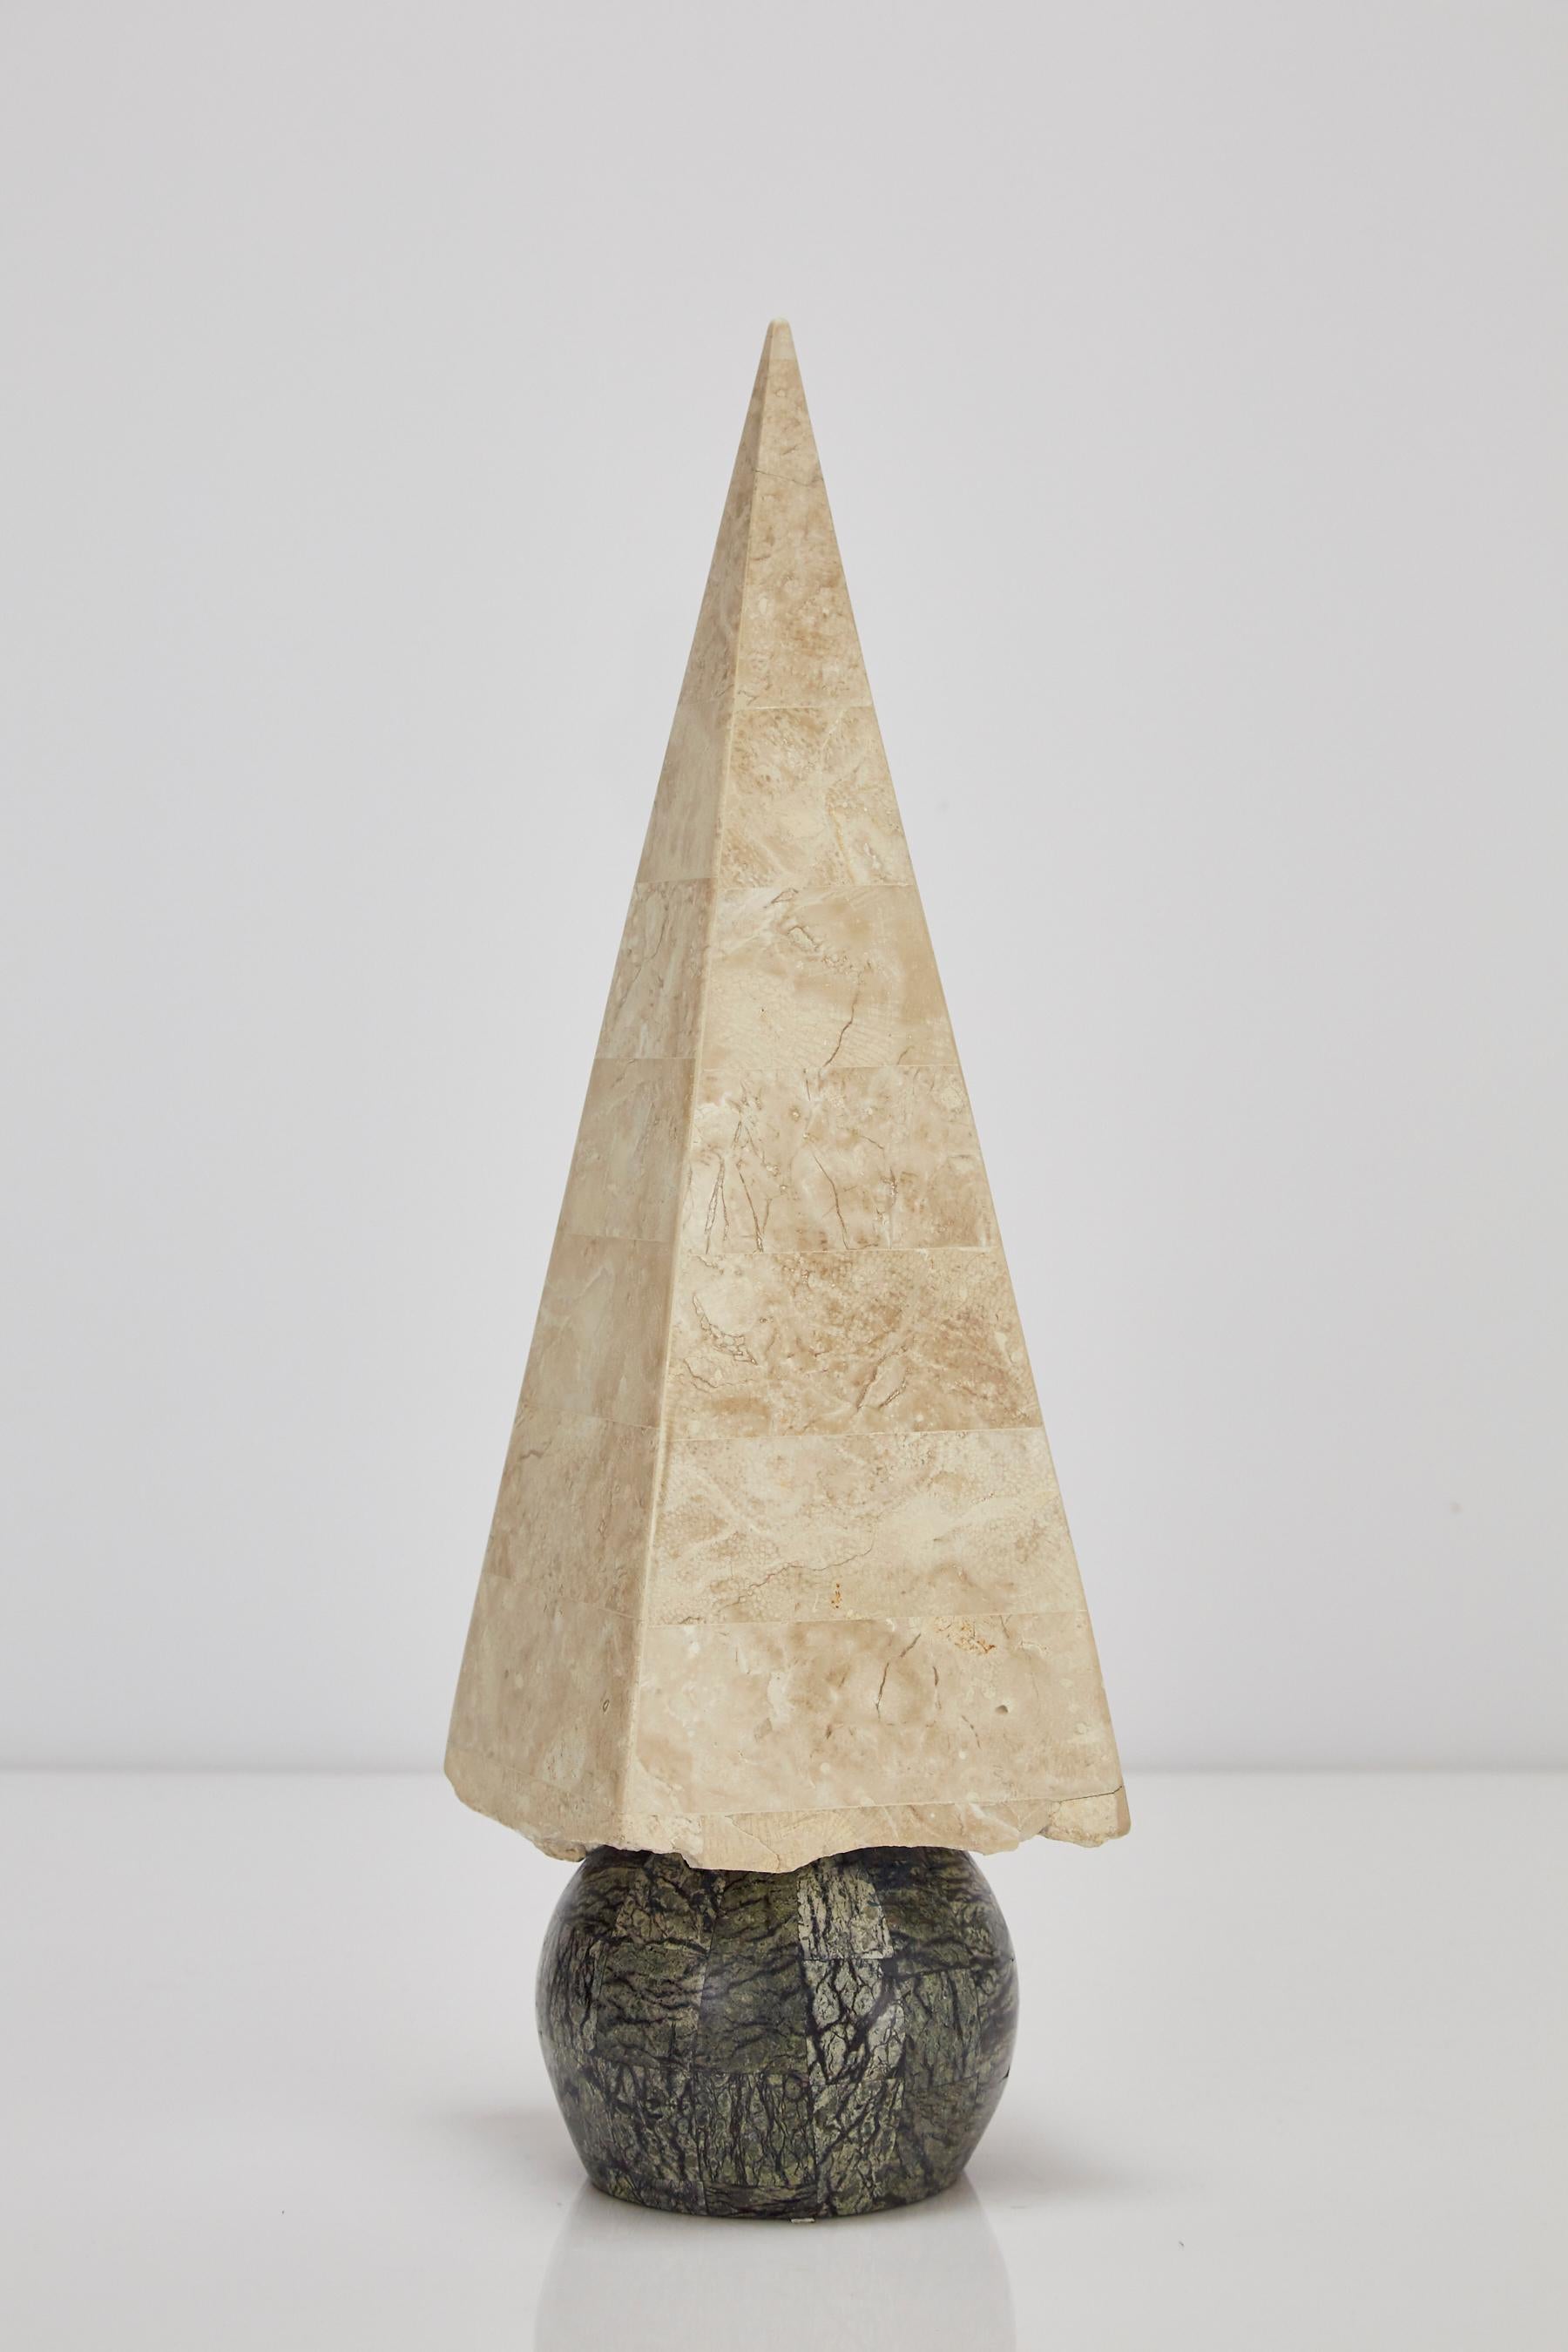 20 in. Tall Tessellated Stone Obelisk, 1990s For Sale 1